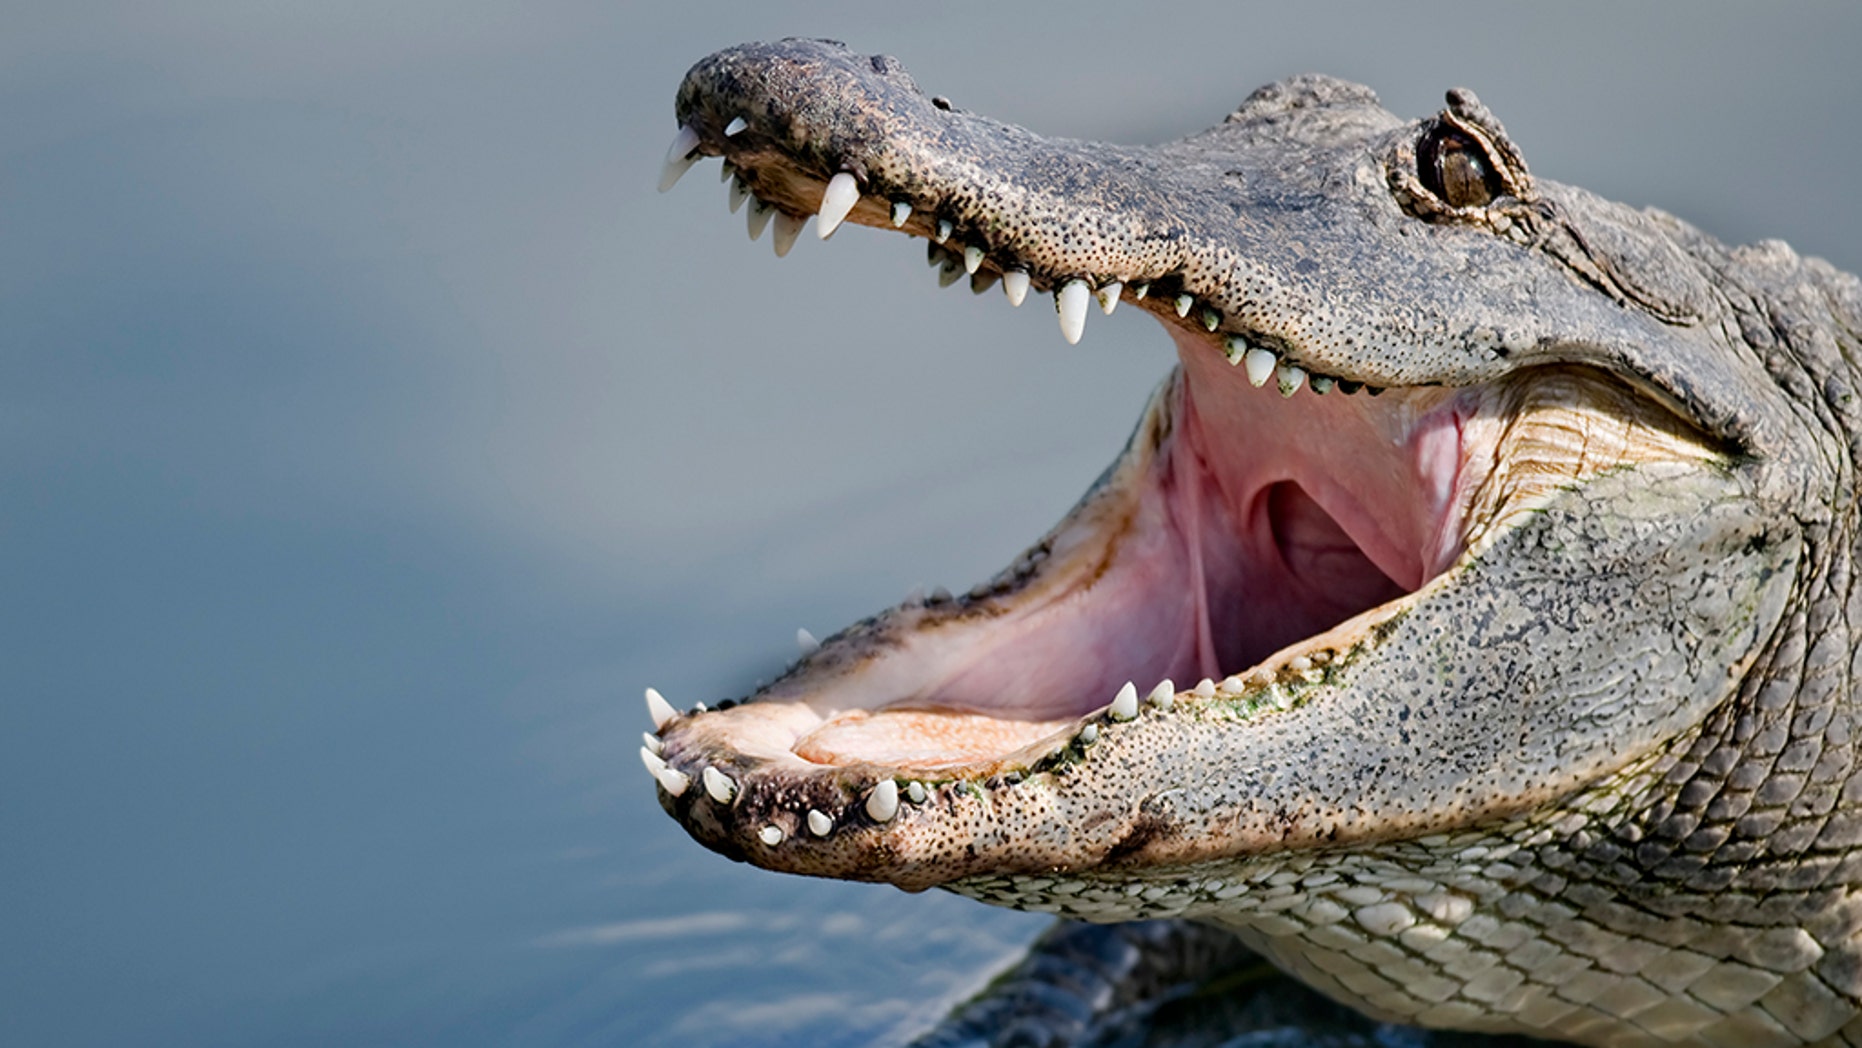 Woman walking dog killed when alligator attacks, drags her into South